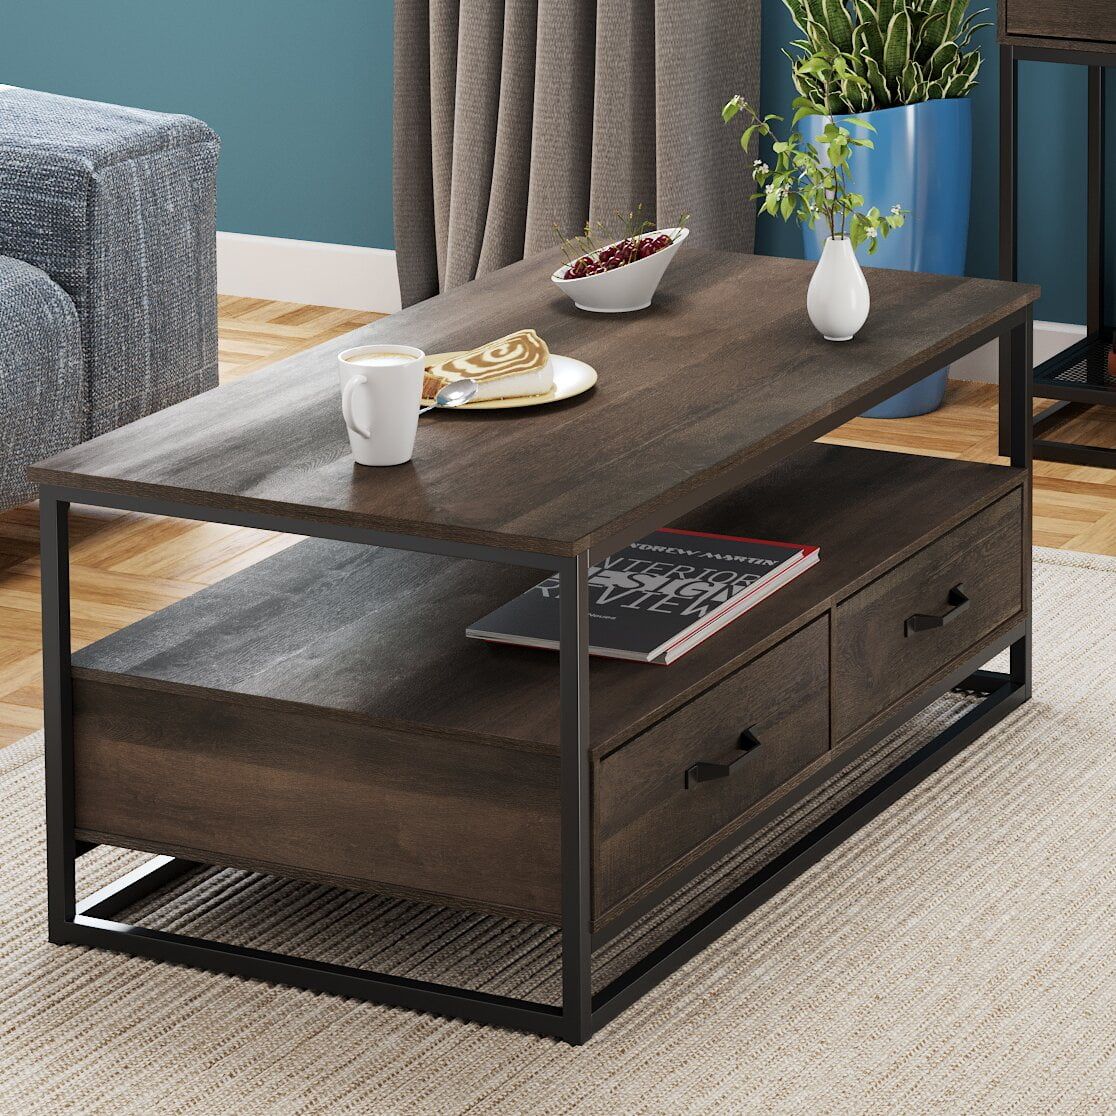 Homfa 43" Coffee Table with Storage Drawers, Wooden TV Stand Center Table for Living Room, Dark B... | Walmart (US)